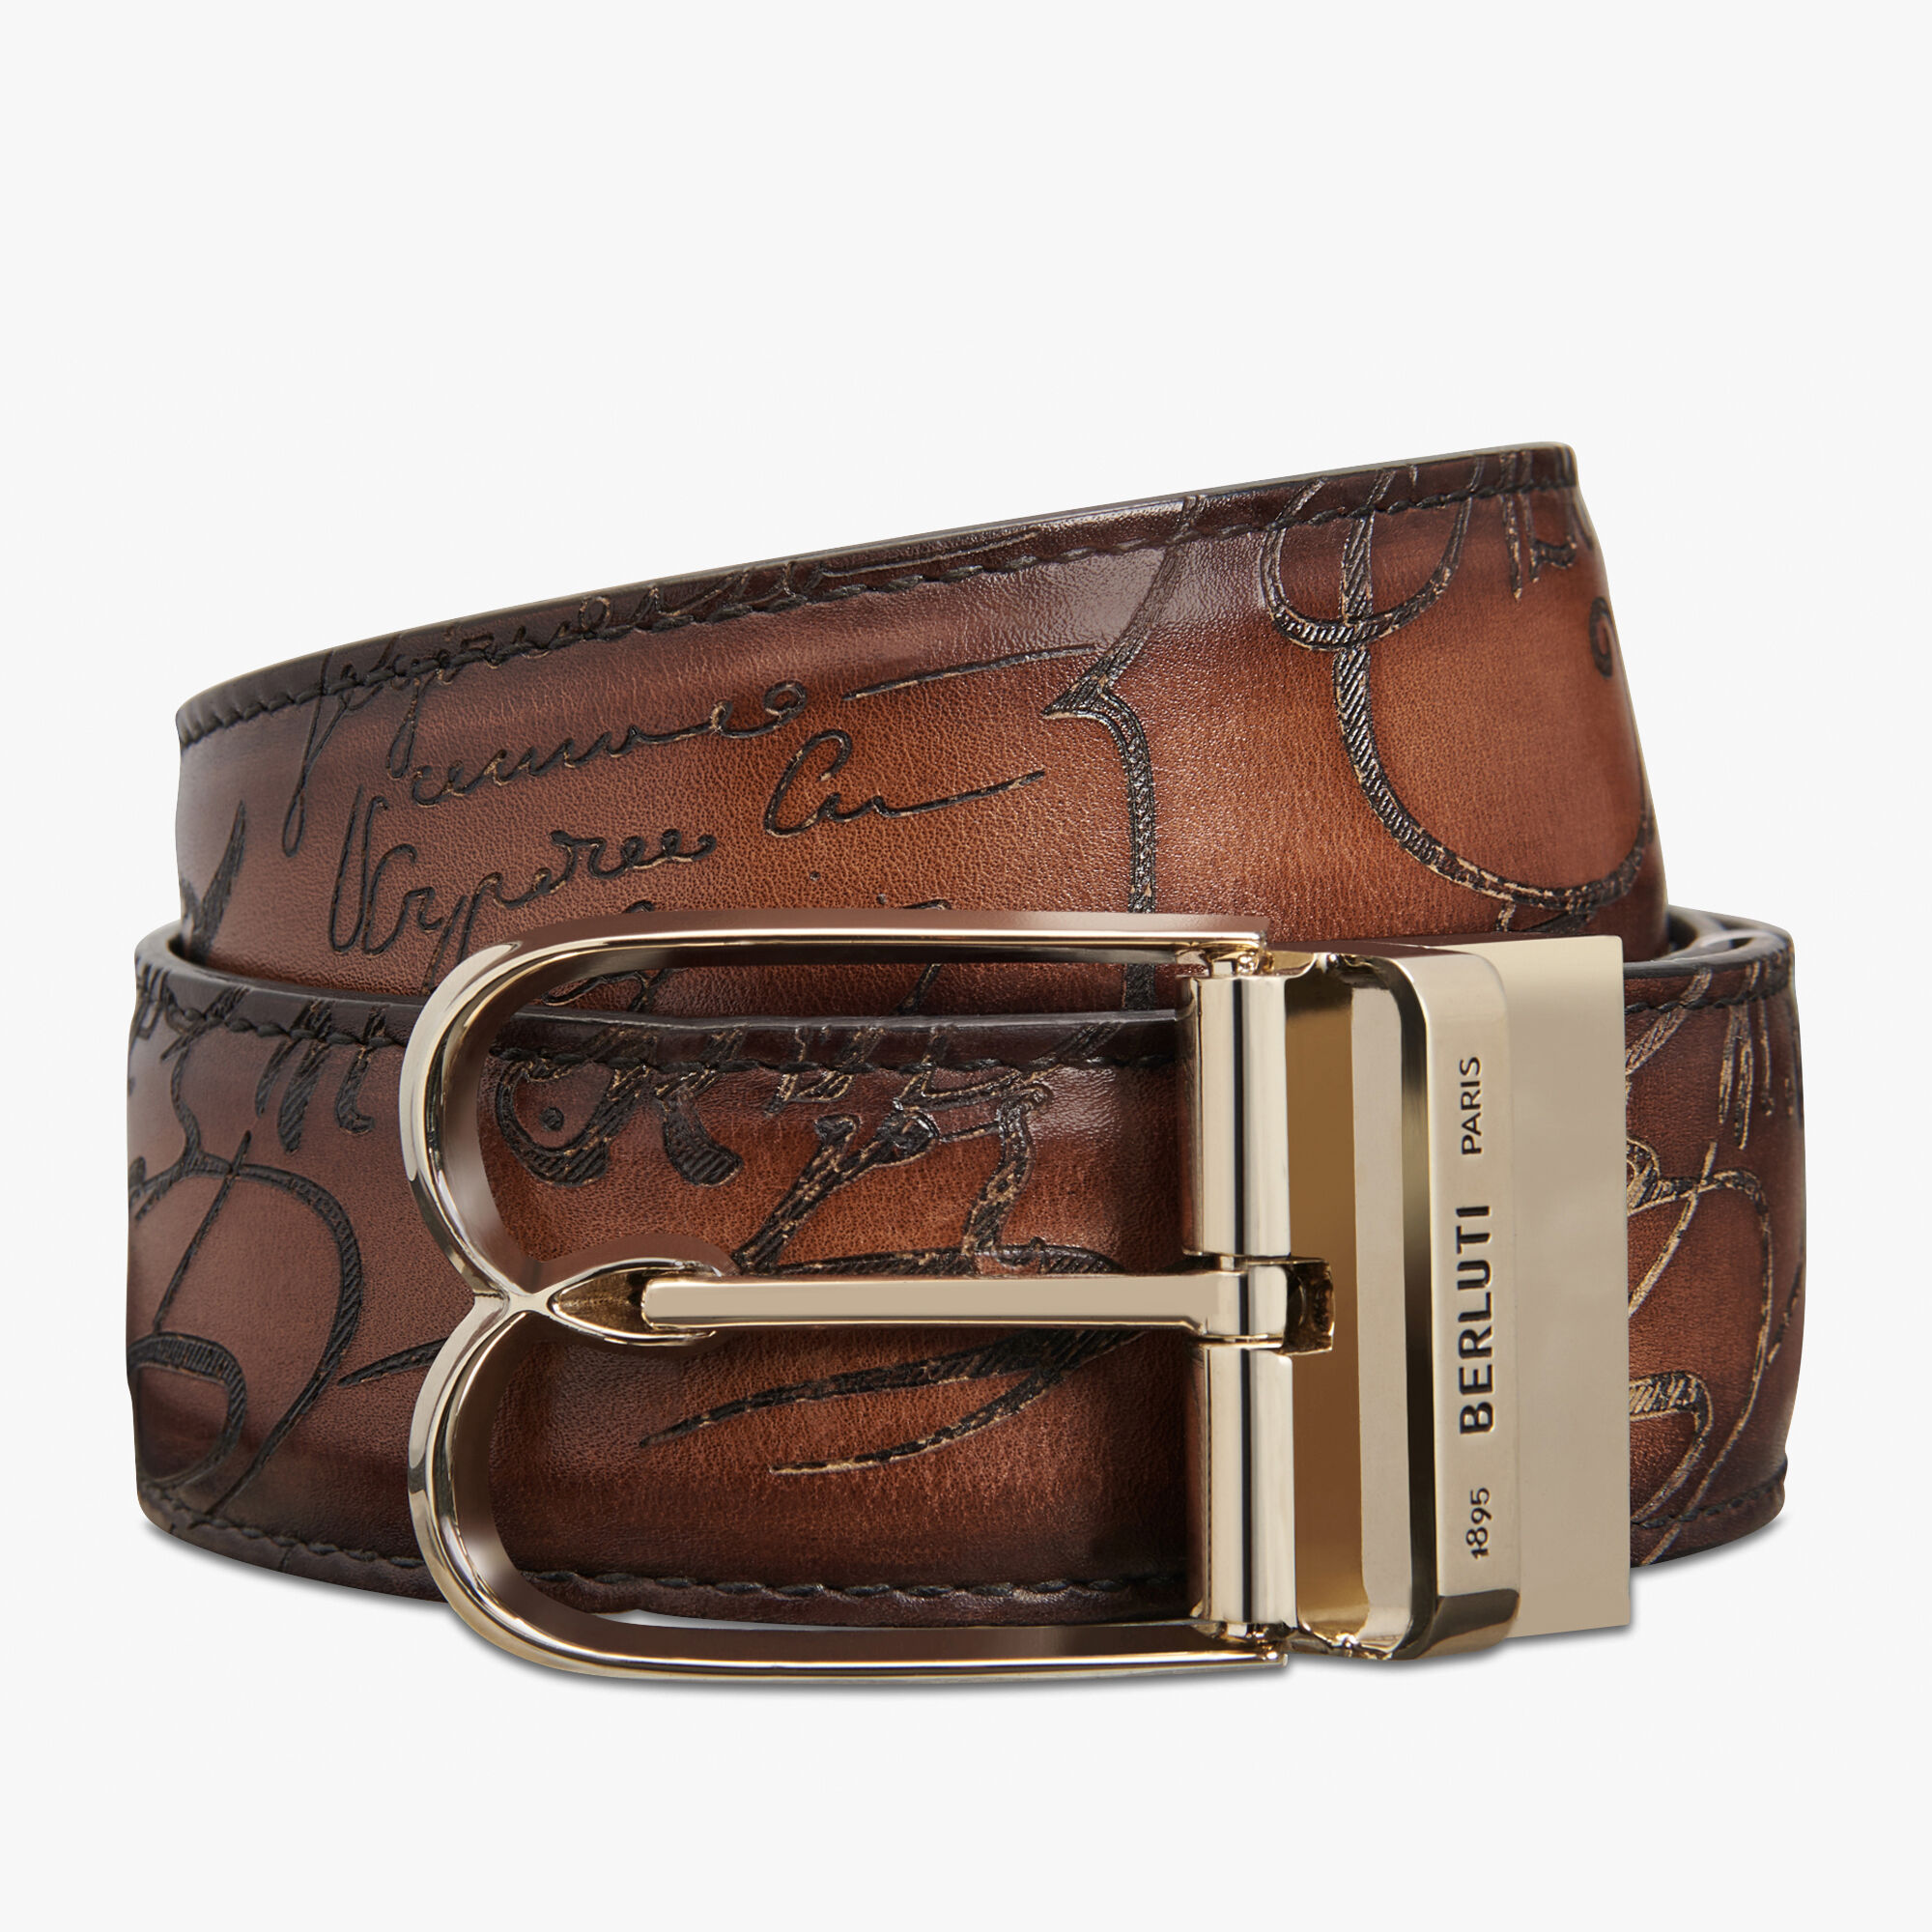 Belt collections by Berluti - US